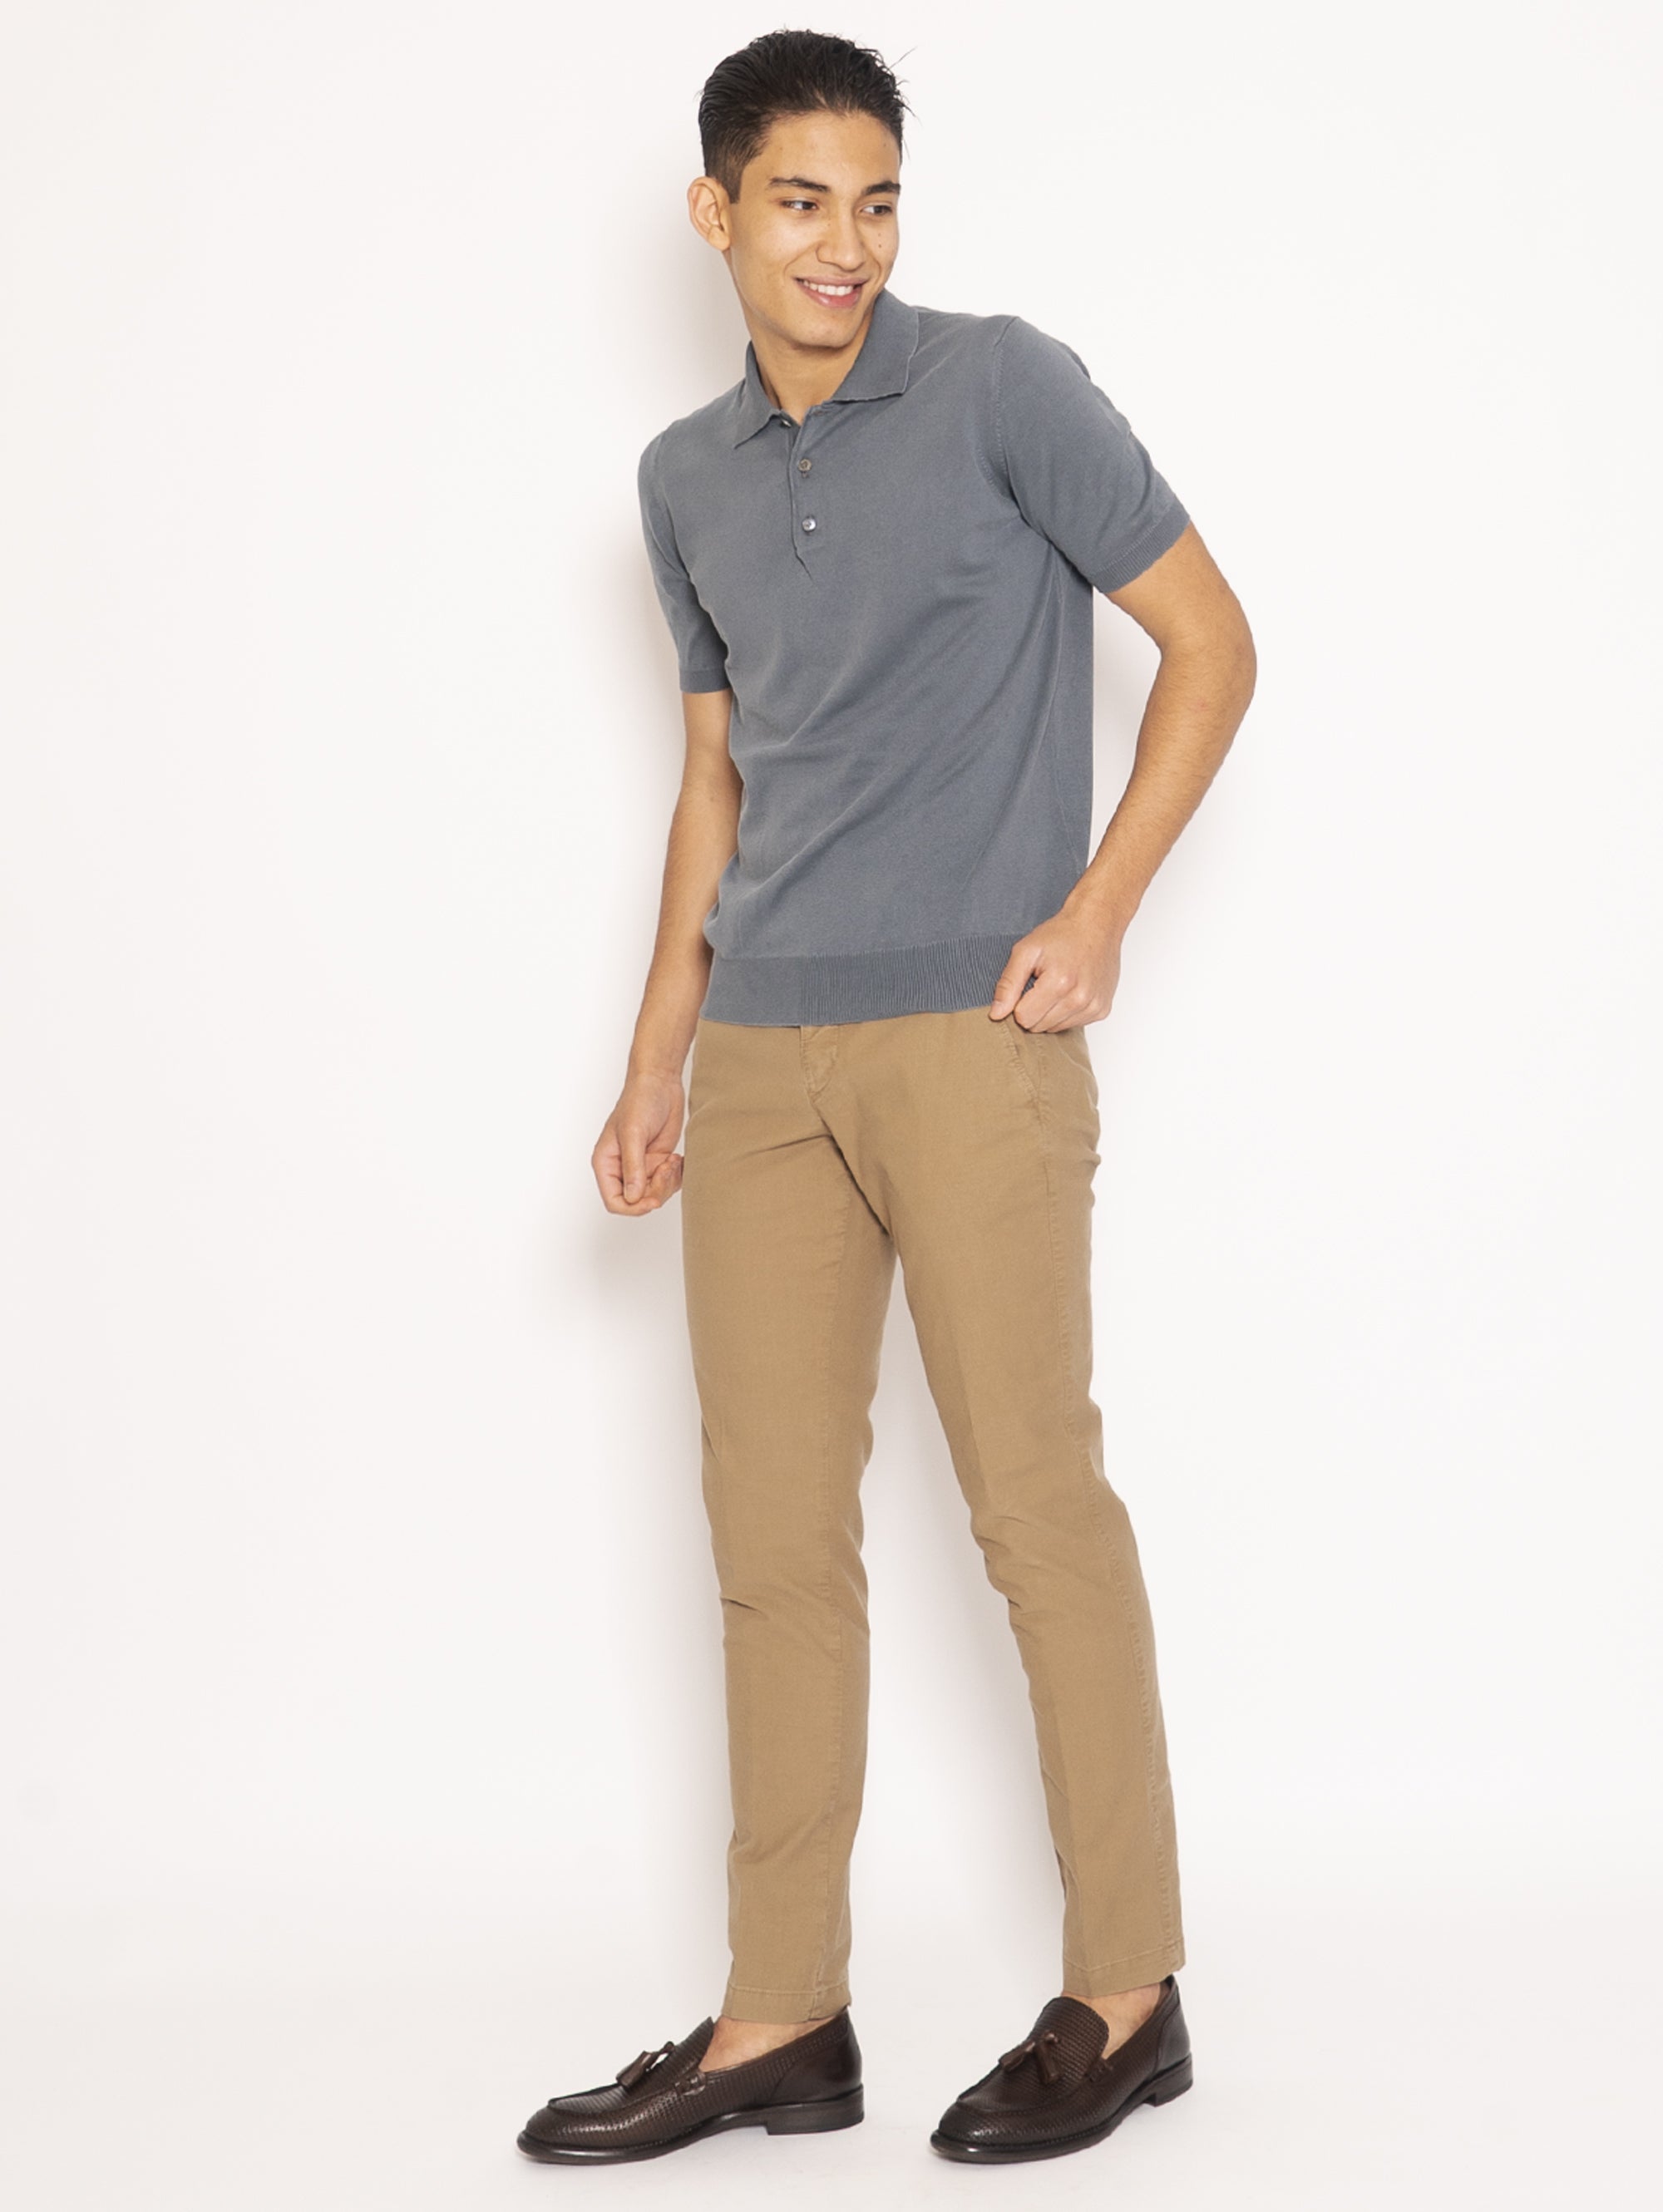 Six Pockets Chino Pants - Biscuit